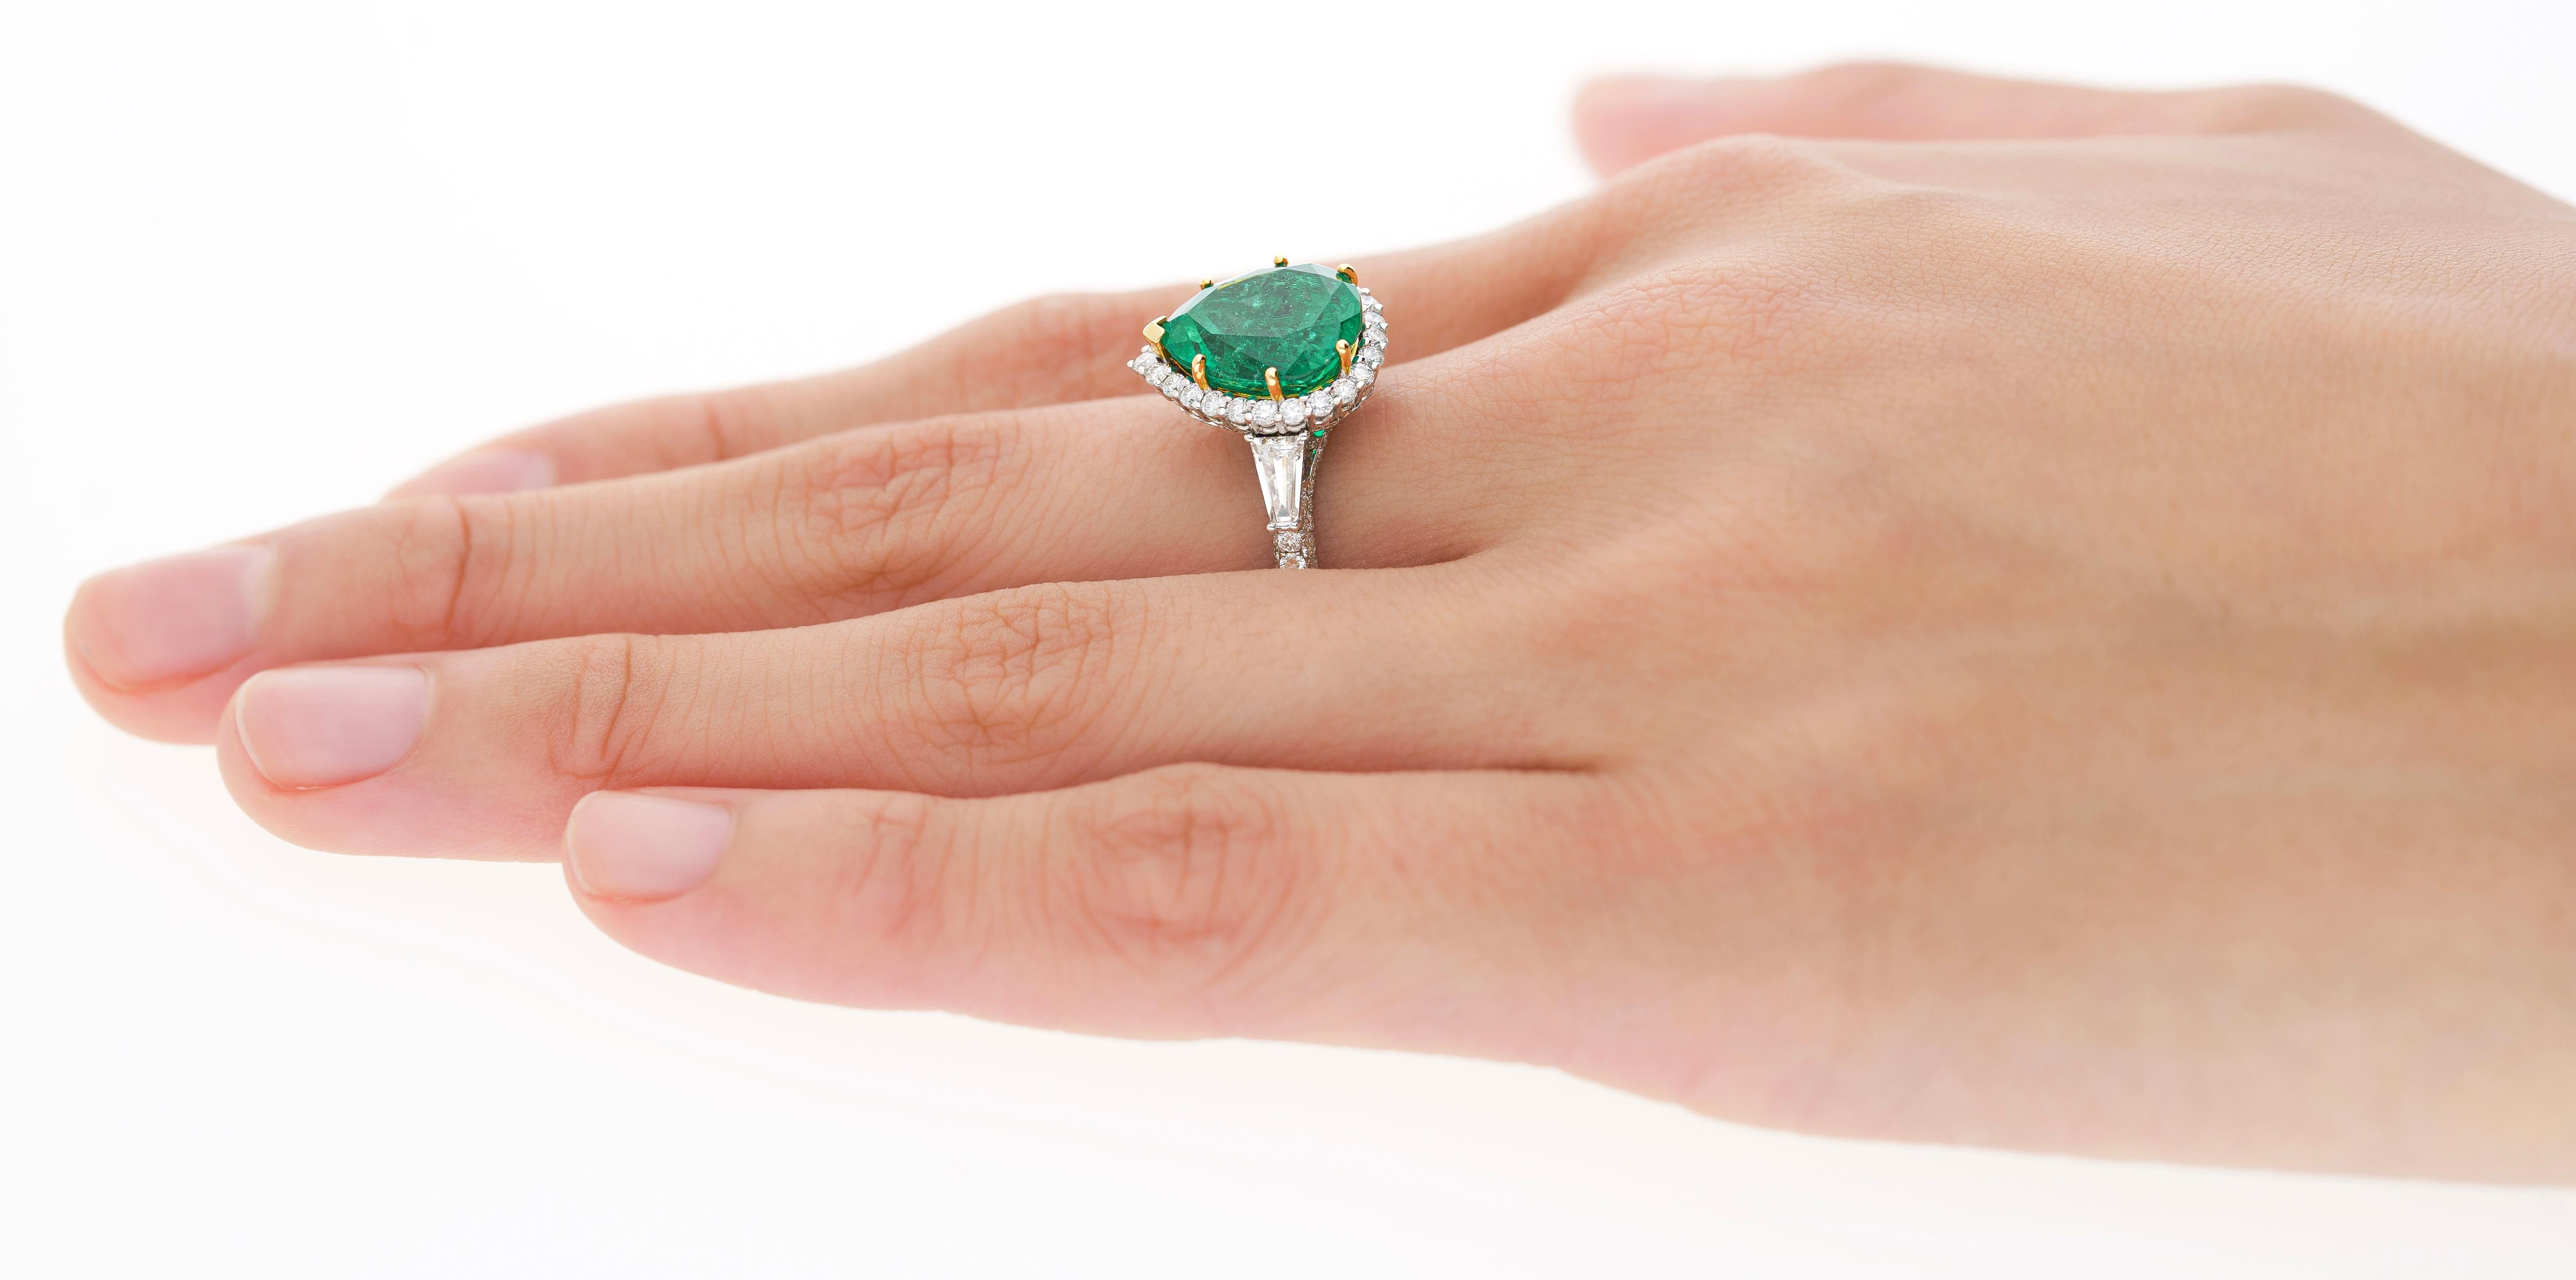 5.12 Carat Vivid Green Pear Cut Colombian Emerald and Diamond Ring in 18K Gold For Sale 6